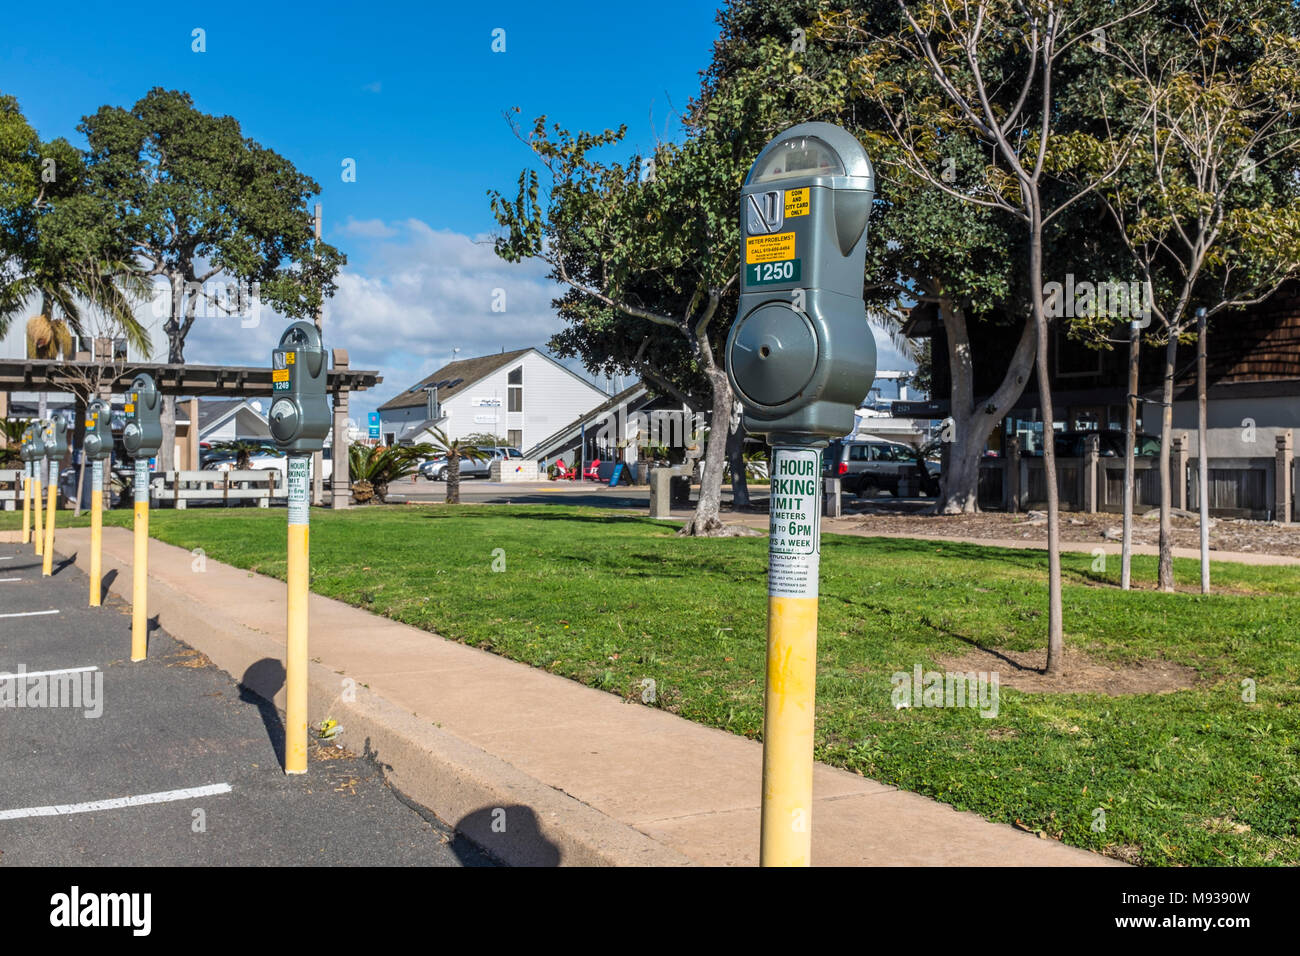 SAN DIEGO, CALIFORNIA, USA - Car park pay meters located on Shelter Island. Stock Photo